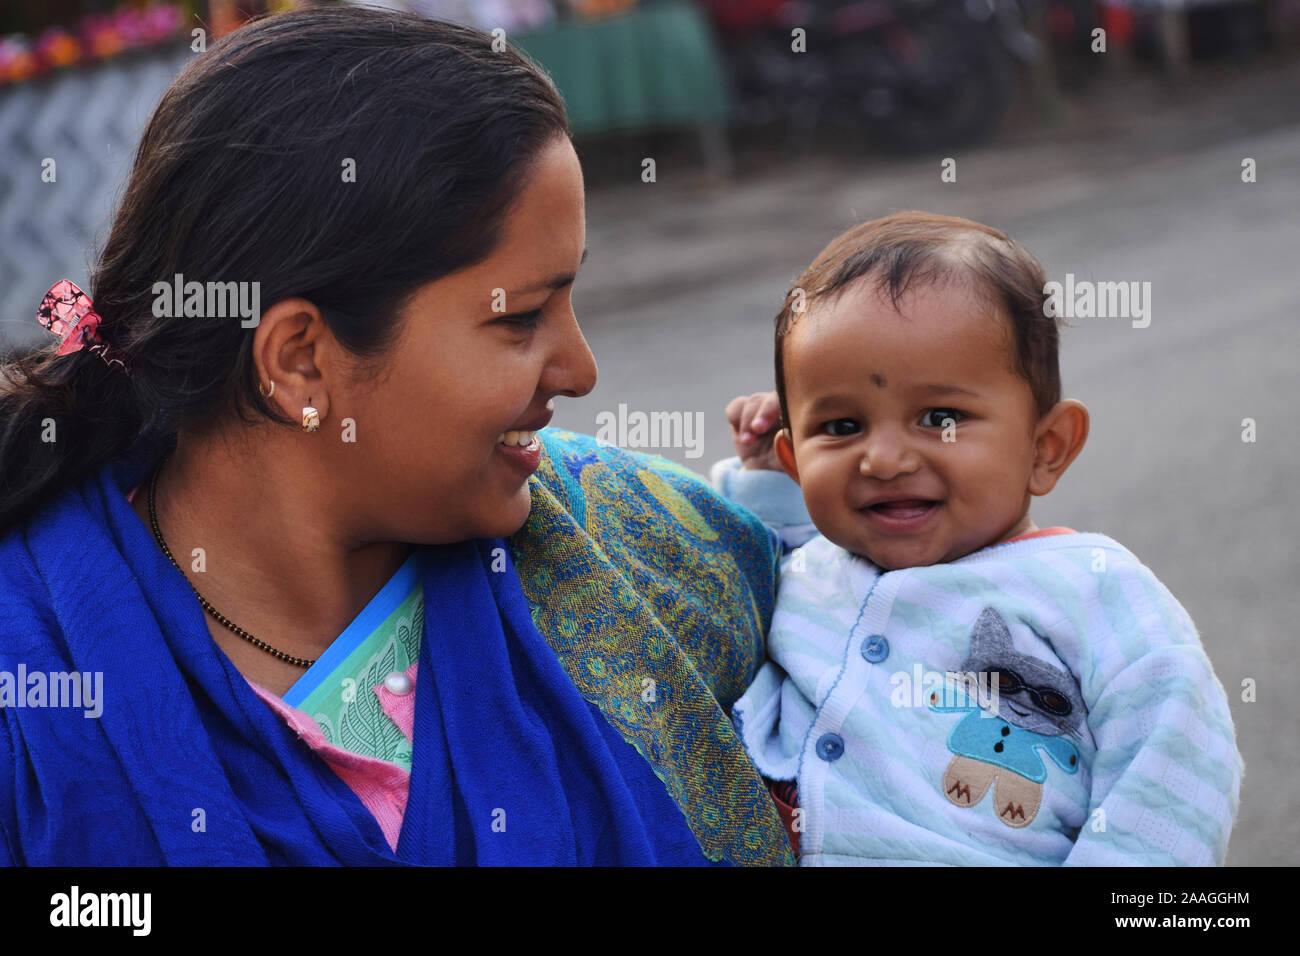 Cute Baby boy with mother looking at camera smiling, Assam, India Stock Photo